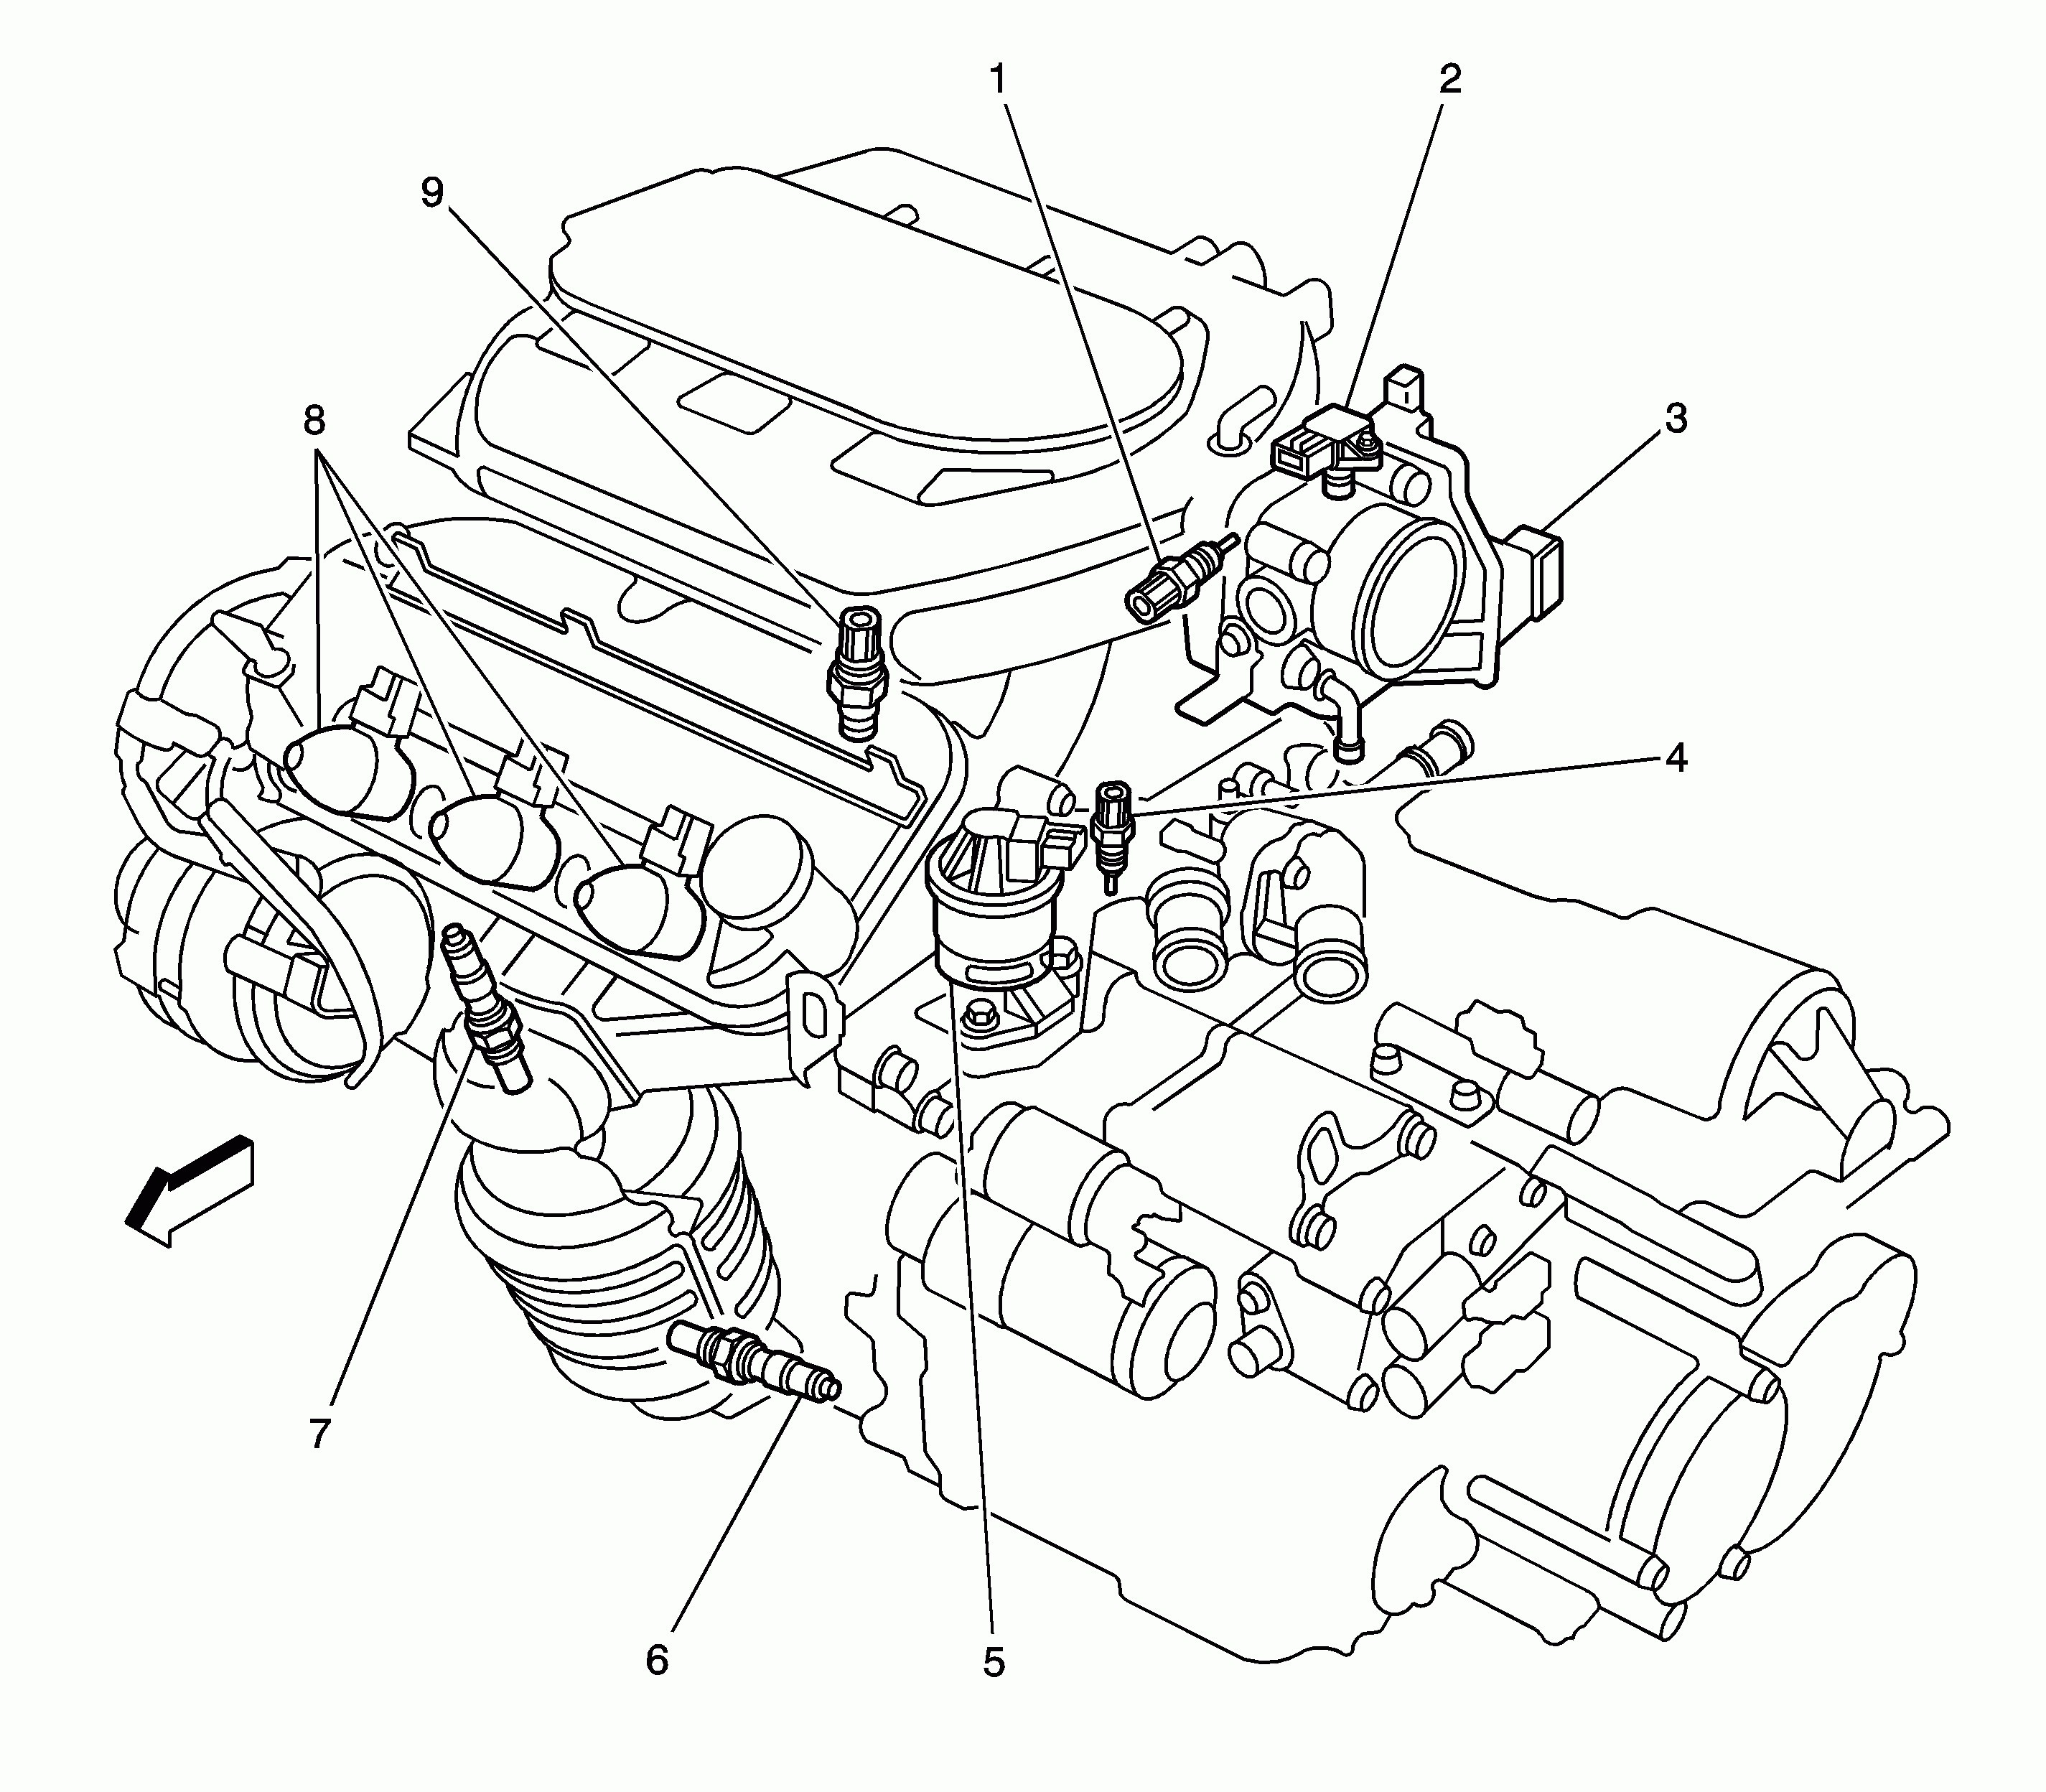 V4 Engine Diagram Take A Look About 2003 Saturn Vue Recalls with Cool S Of V4 Engine Diagram